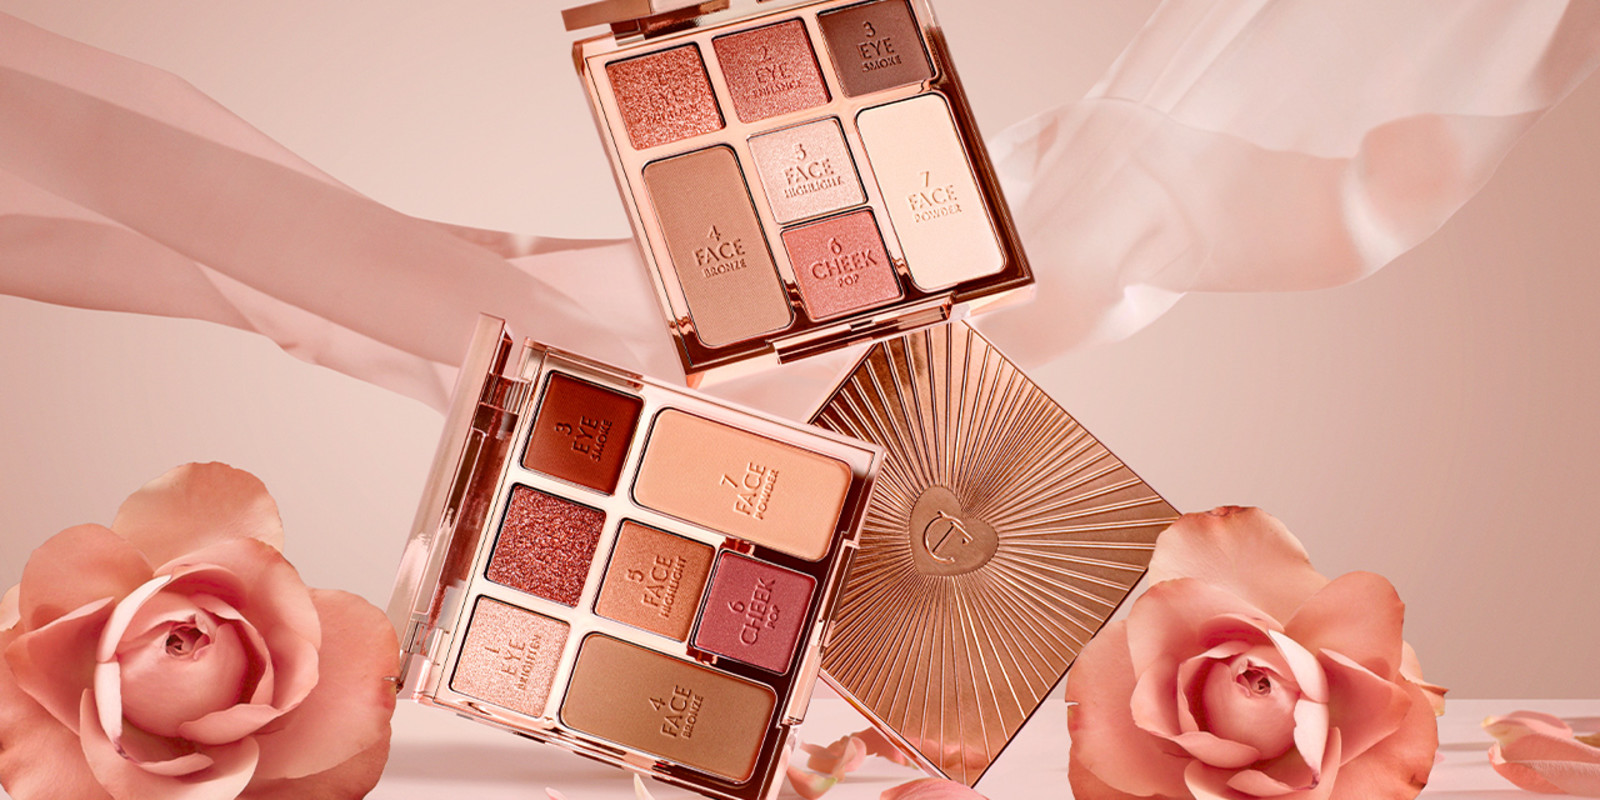 Two, open face palettes for fair to medium and medium to deep-tones with three eyeshadows, two blushes, and contour powders.